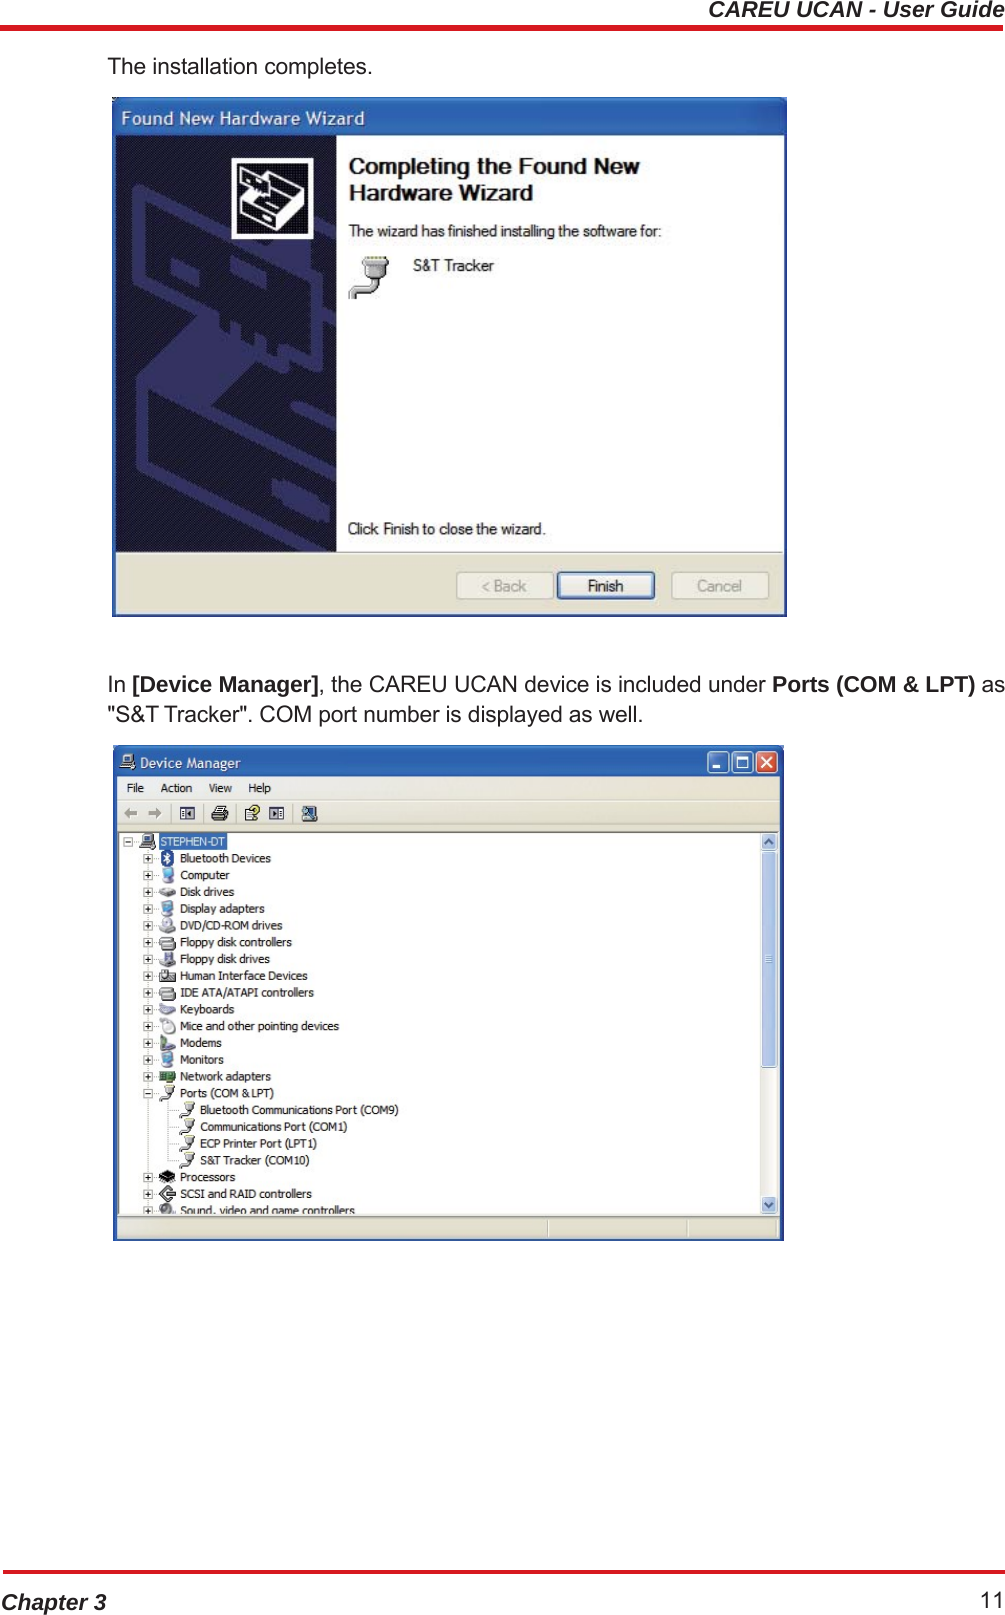 CAREU UCAN - User GuideChapter 3 11The installation completes.  In [Device Manager], the CAREU UCAN device is included under Ports (COM &amp; LPT) as &quot;S&amp;T Tracker&quot;. COM port number is displayed as well.  